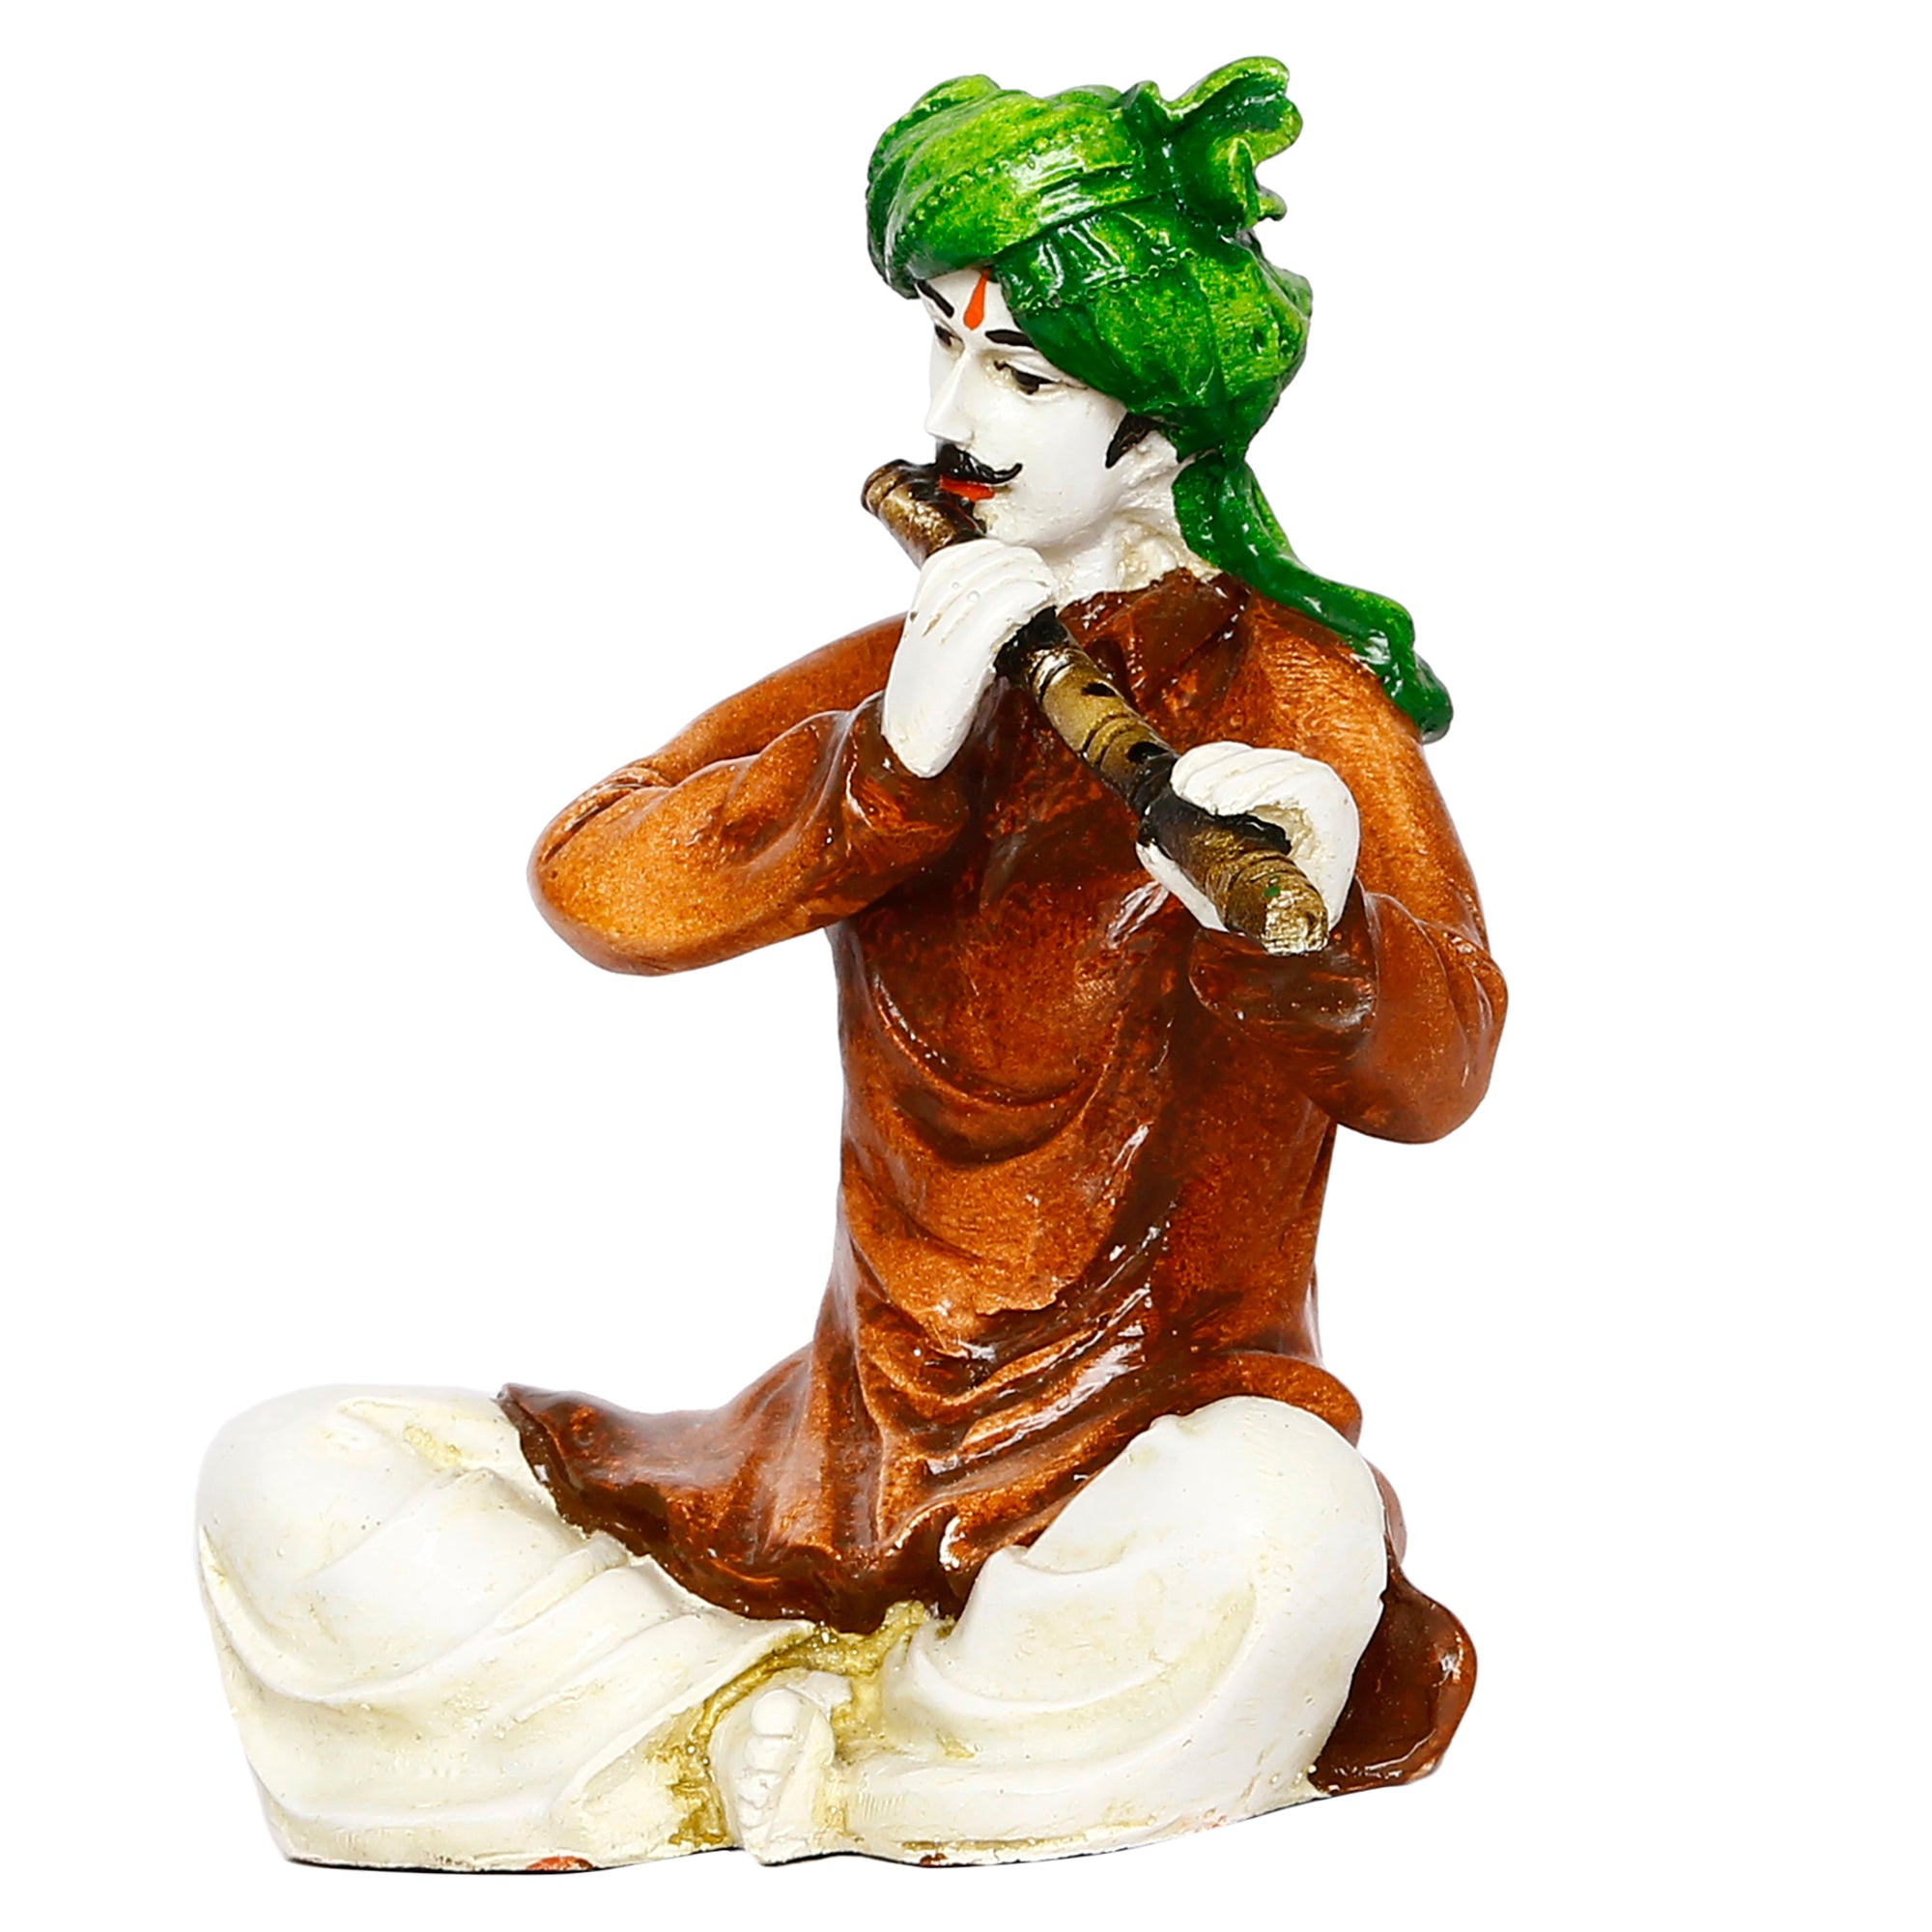 Polyresin Rajasthani Musician Men Statue Playing Flute Human Figurines Home Decor Showpiece 5